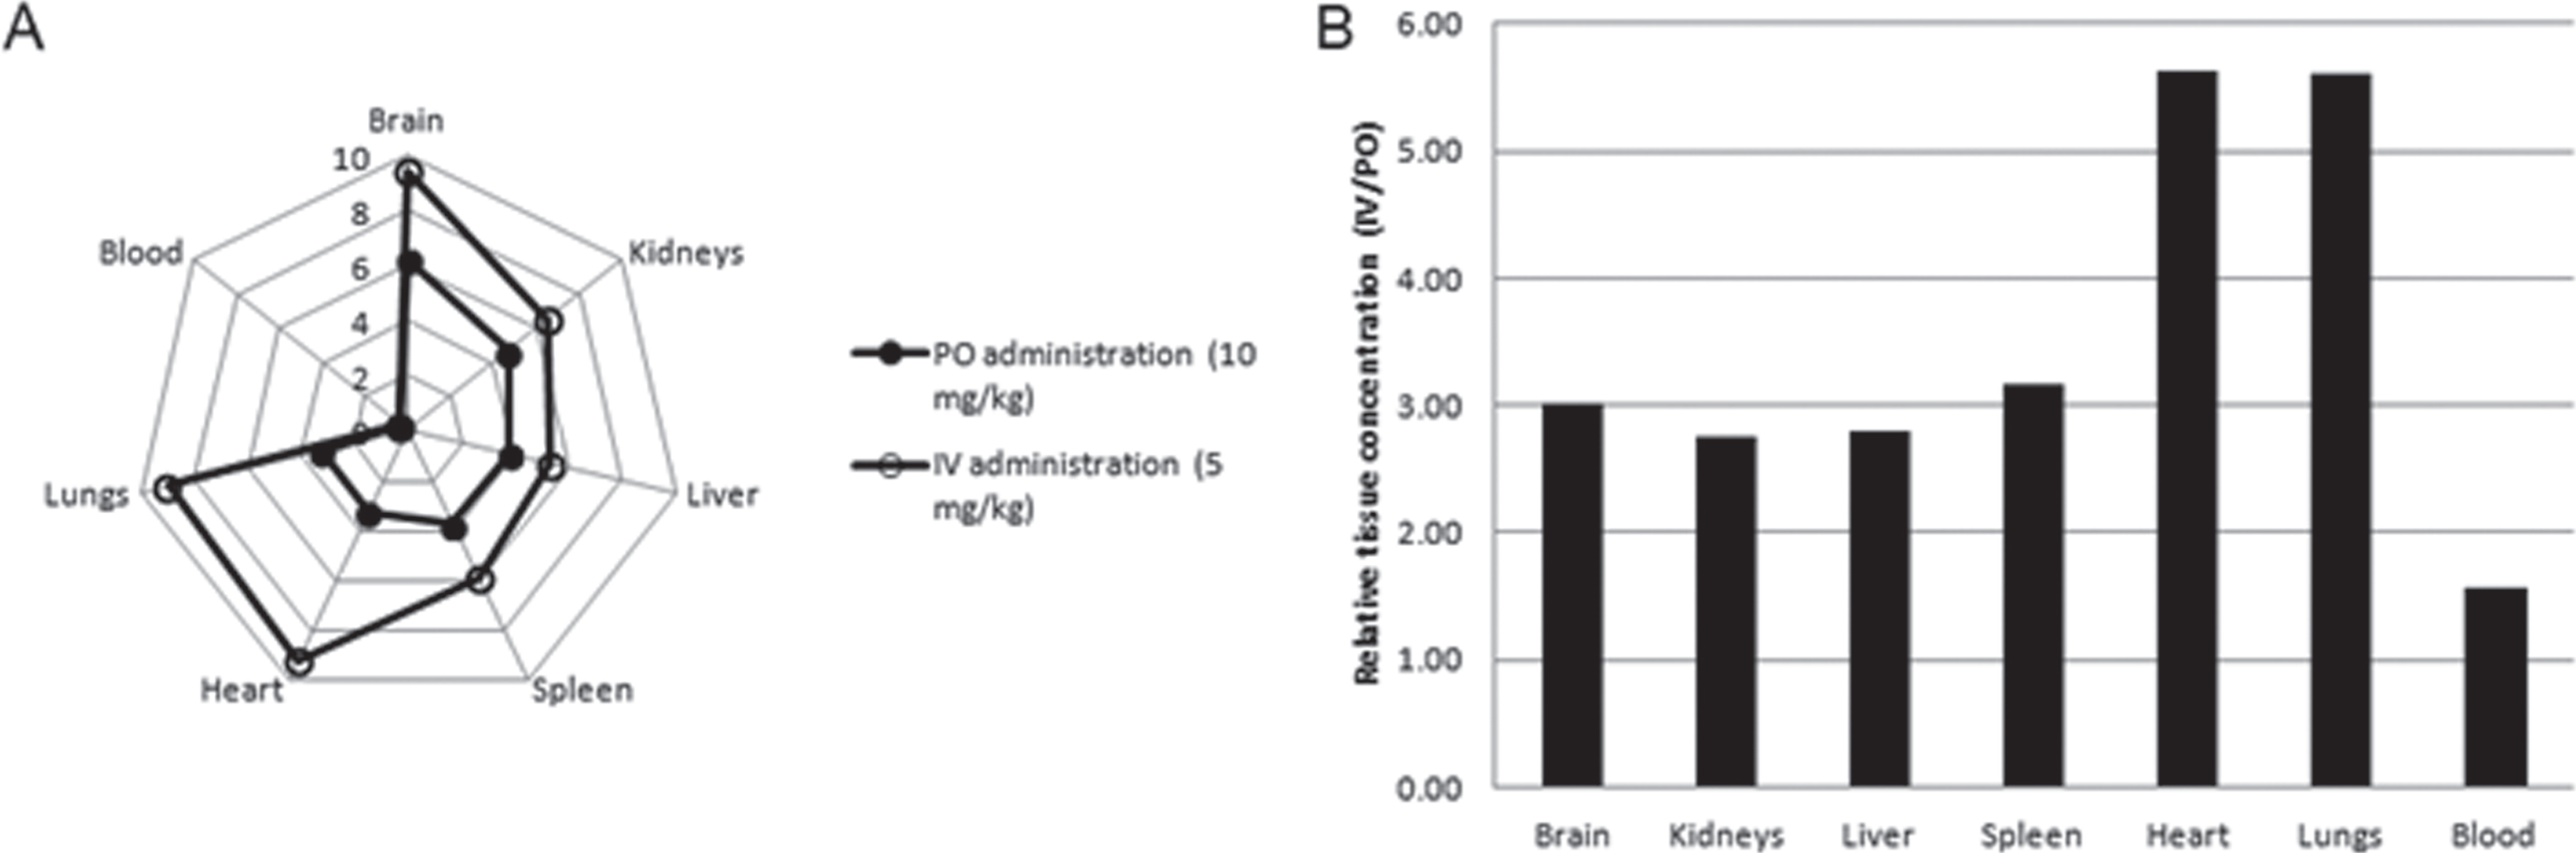 A) Content of AVN-101 (μg/mL) in Wistar rat tissues 4 h after either IV (5 mg/kg) or PO (10 mg/kg) administration. B) Ratio of tissue AVN-101 concentrations, IV administration over PO administration, normalized by the corresponding dose.